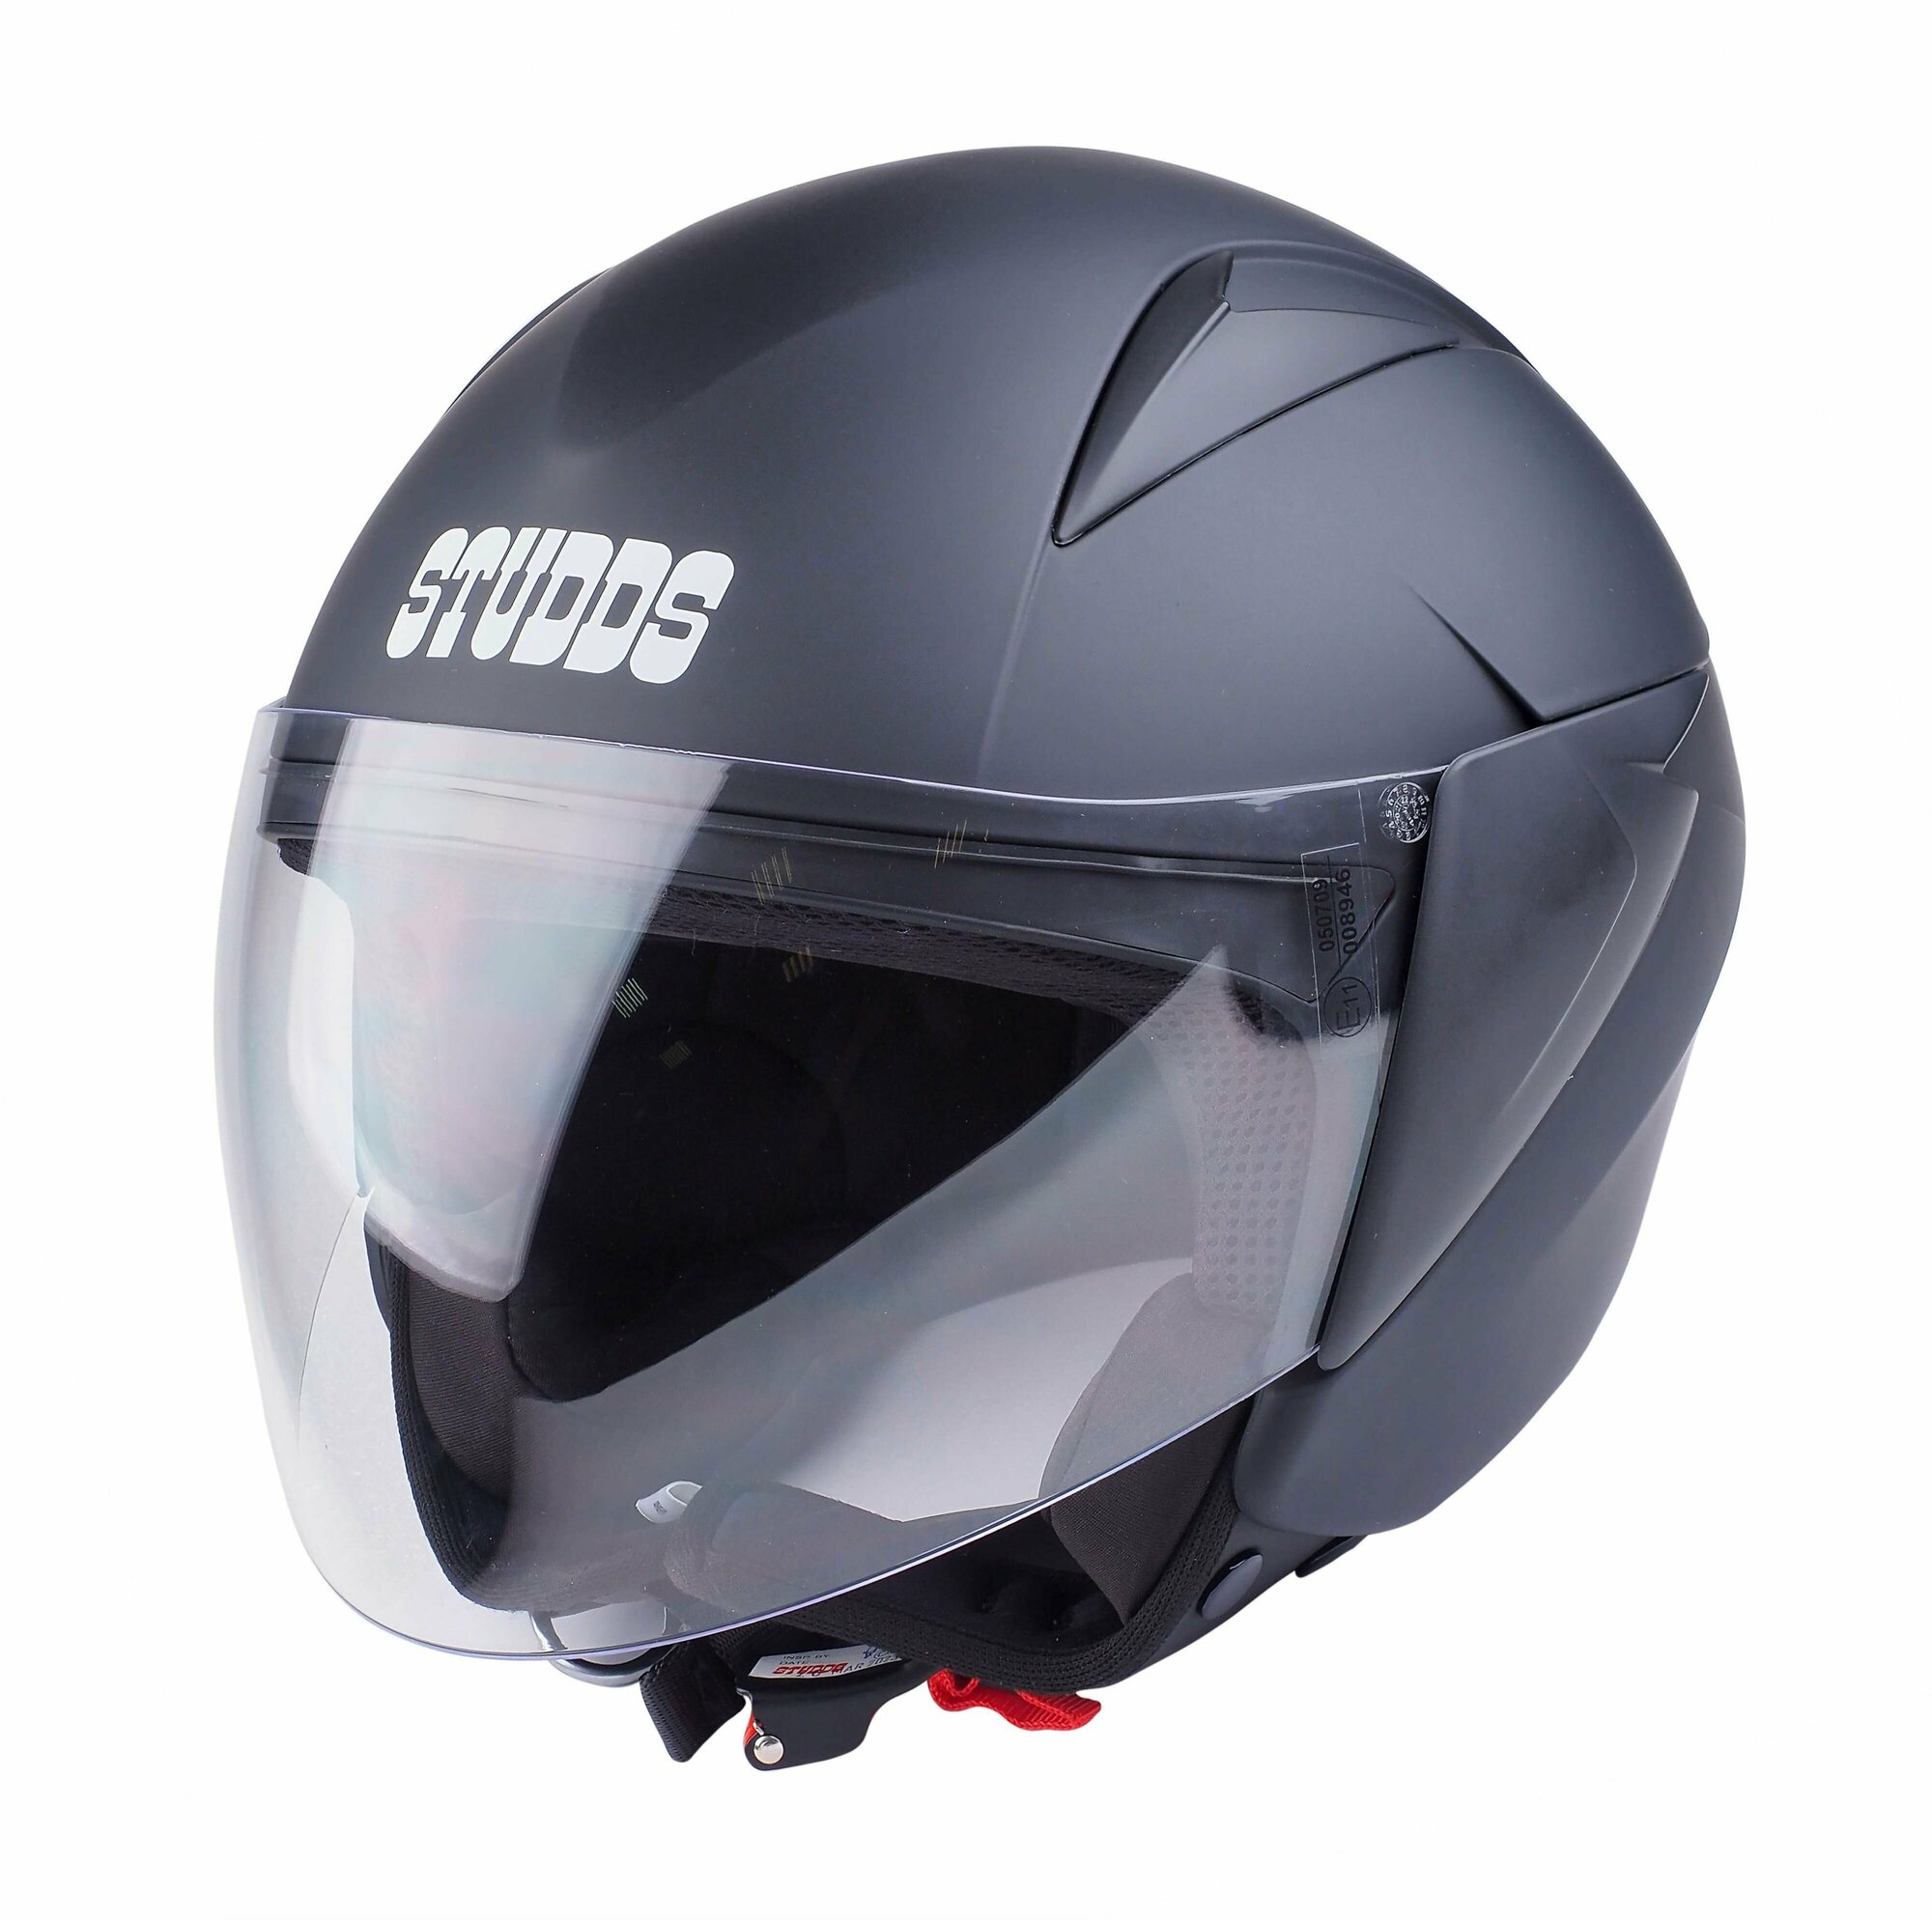 Шлем Studds RMS Z600 Solid